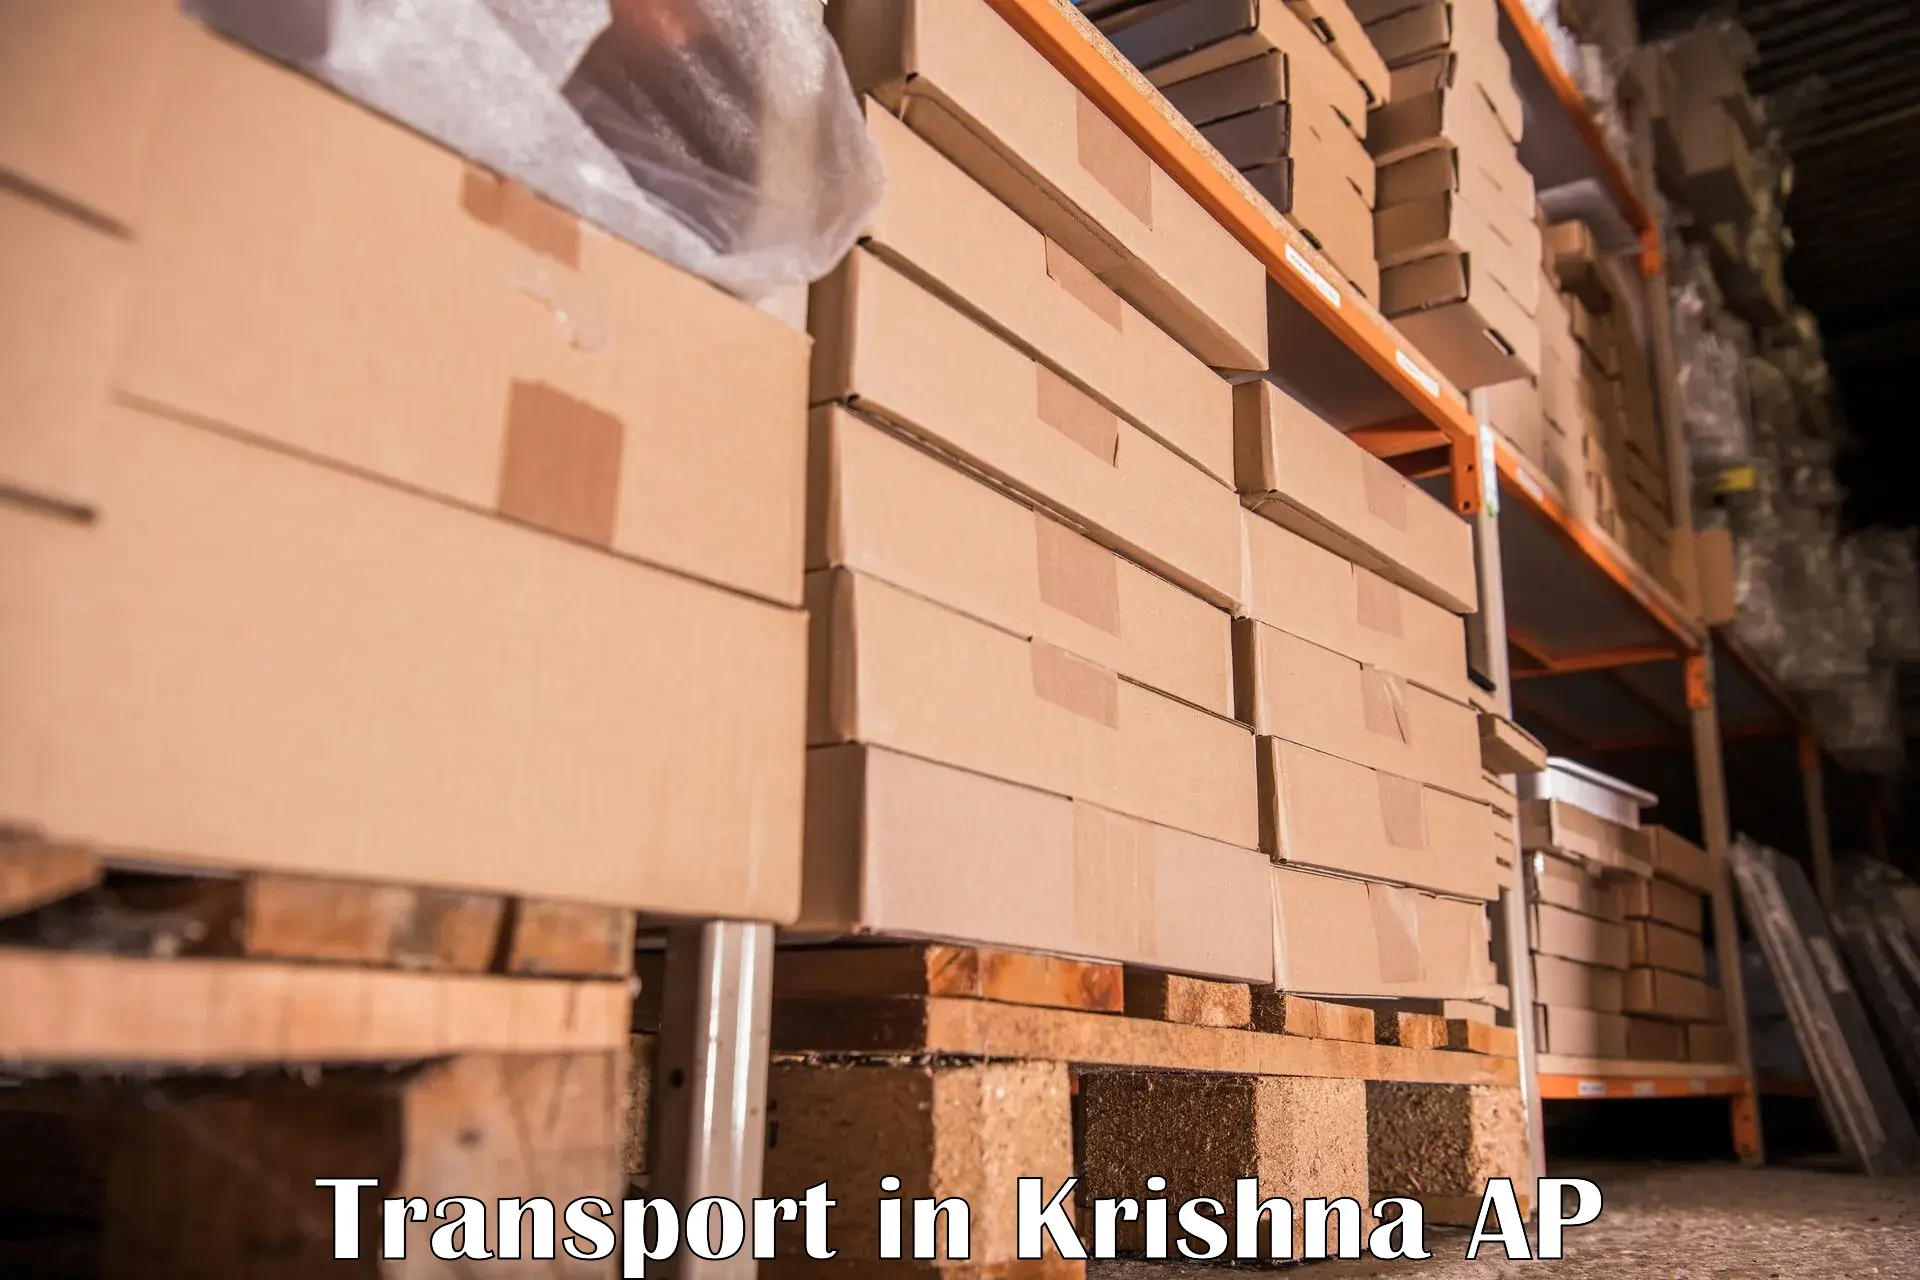 Air freight transport services in Krishna AP